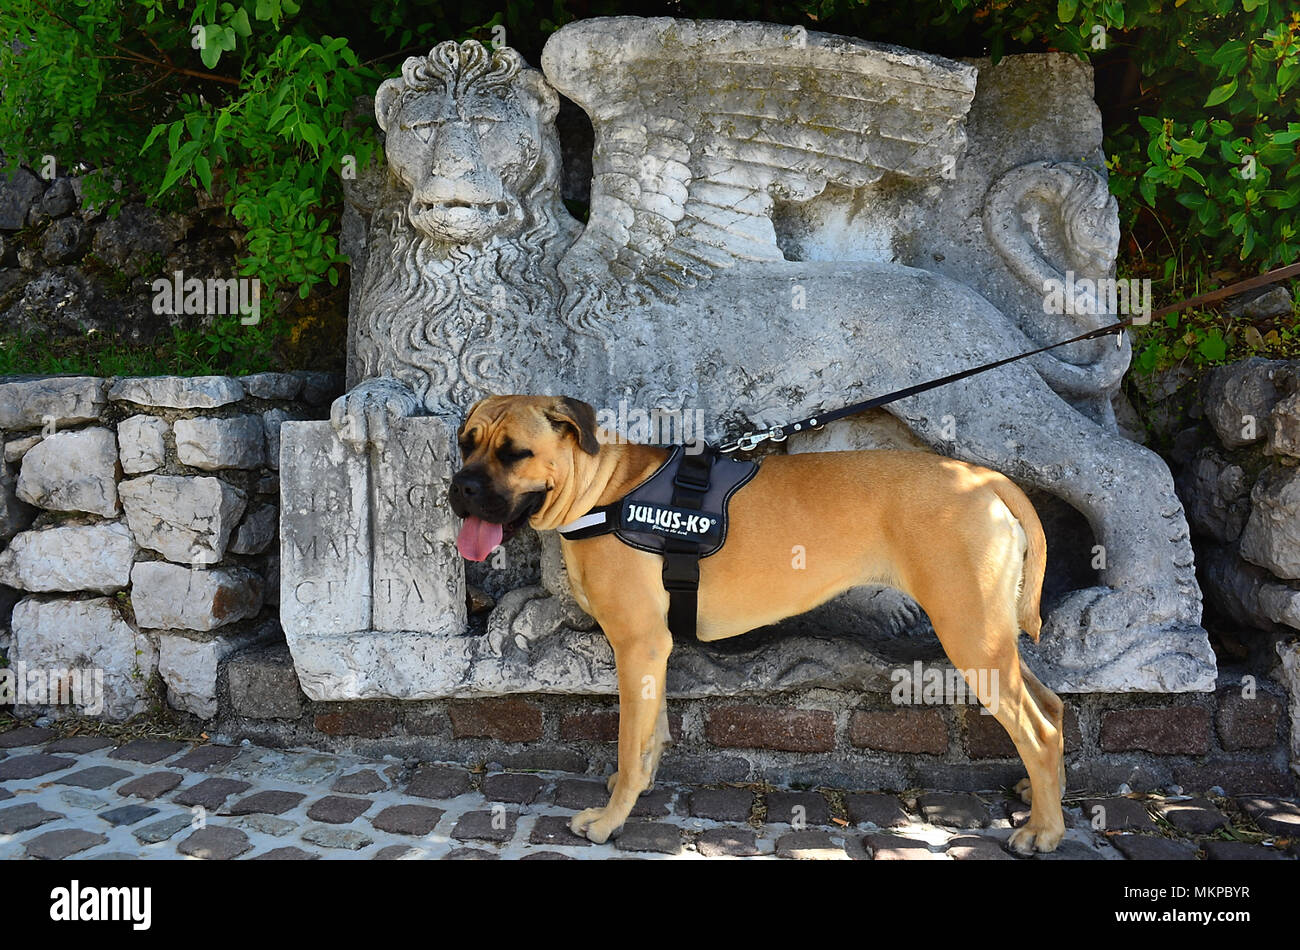 Rijeka, Croatia. Trsat castle.  It is thought that the castle lies at the exact spot of an ancient Illyrian and Roman fortress. A Corso dog  in front of the bas-relief of the Lion of San Marco. The Lion recalls the domination of Venice on these lands. Stock Photo